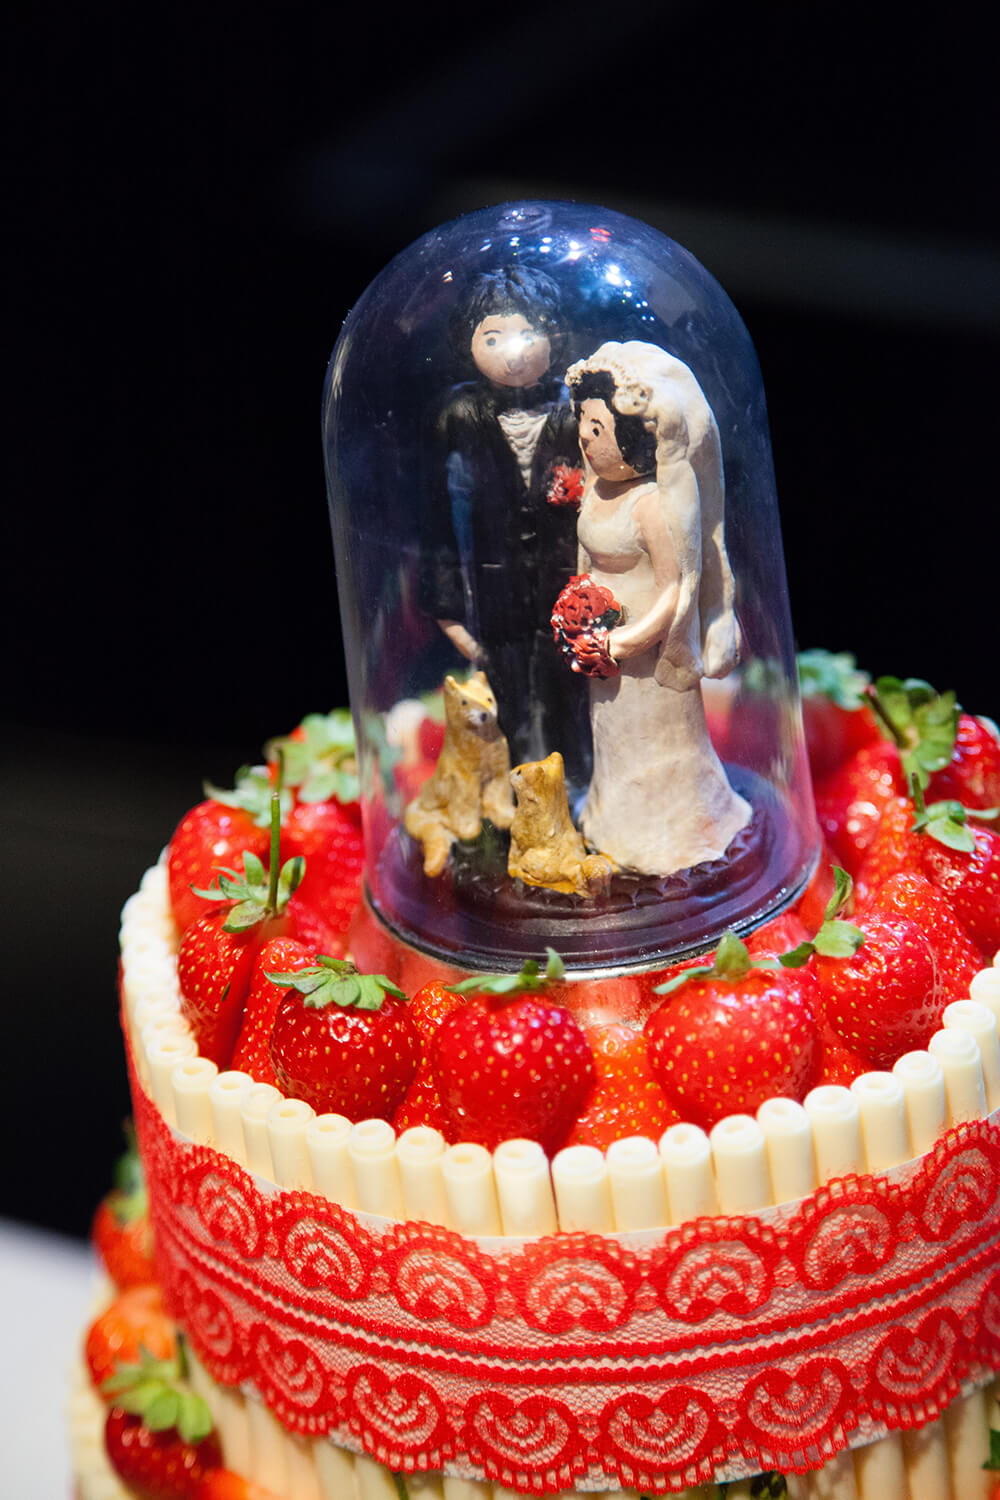 Bridebook.co.uk Dome Couple Cake Topper White Chocolate and Strawberries